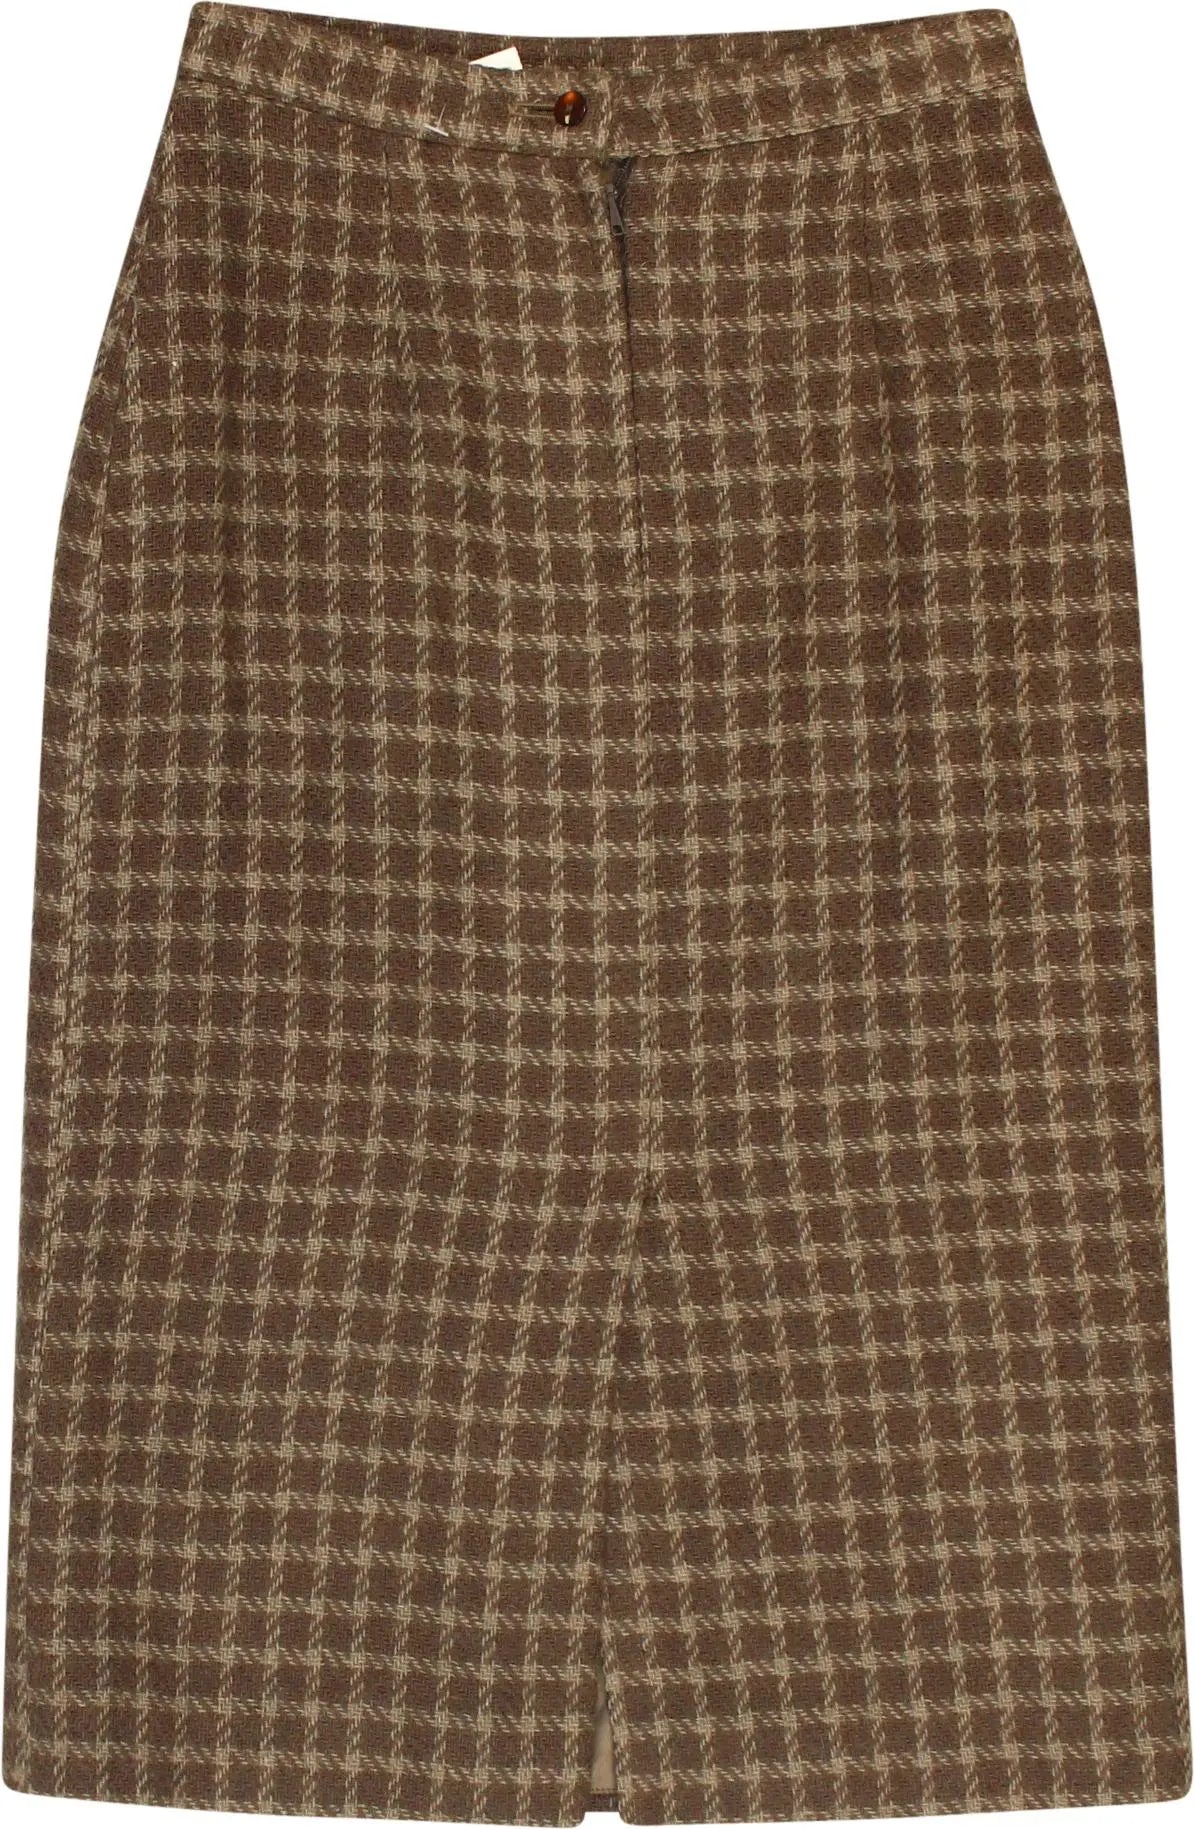 Unknown - Checkered pencil skirt- ThriftTale.com - Vintage and second handclothing